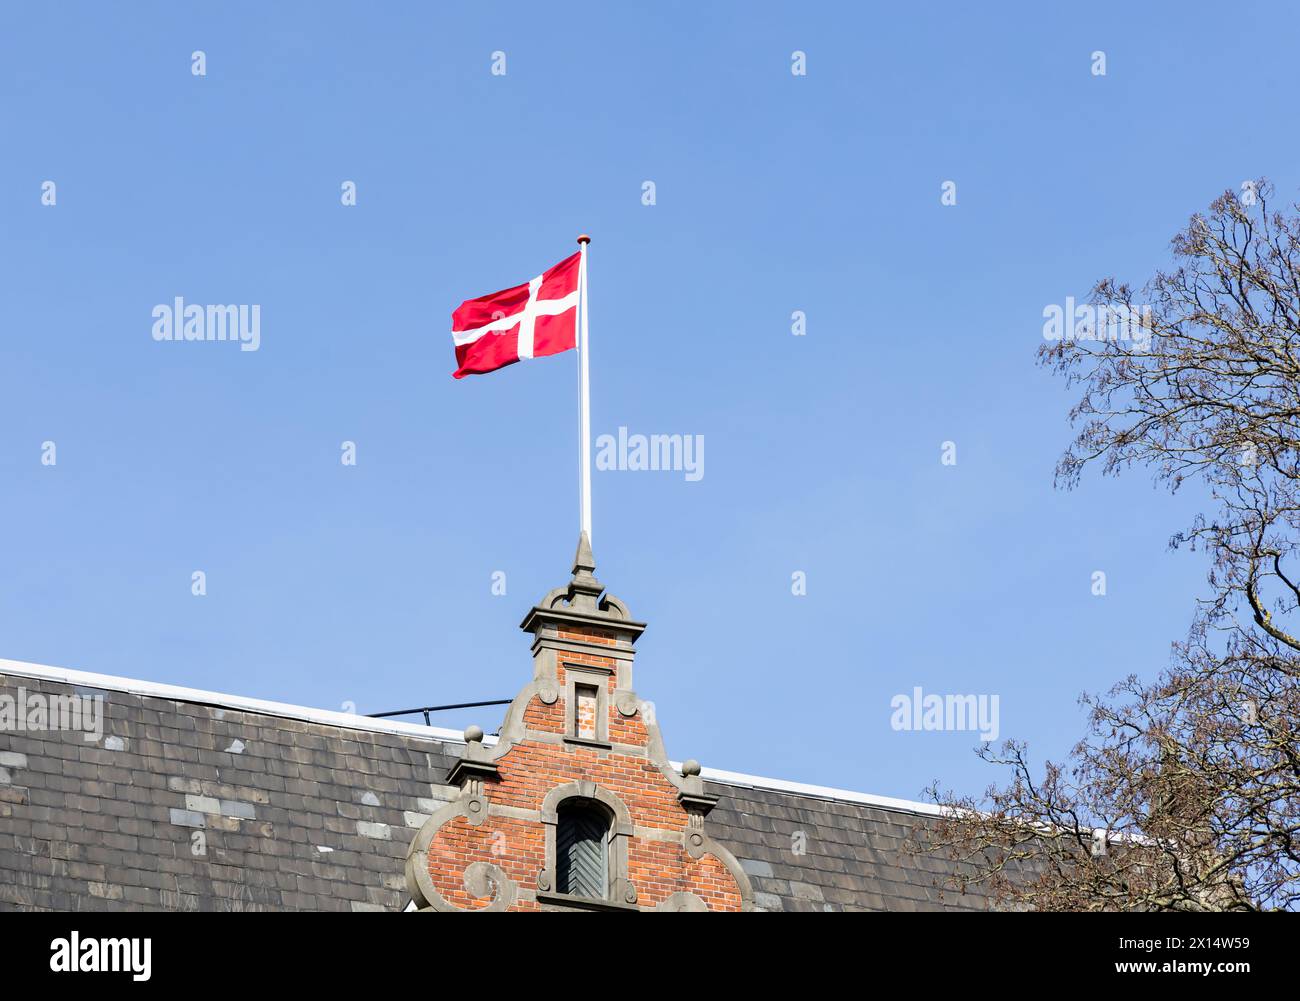 Danish flag on the roof of a building against a blue sky. Stock Photo